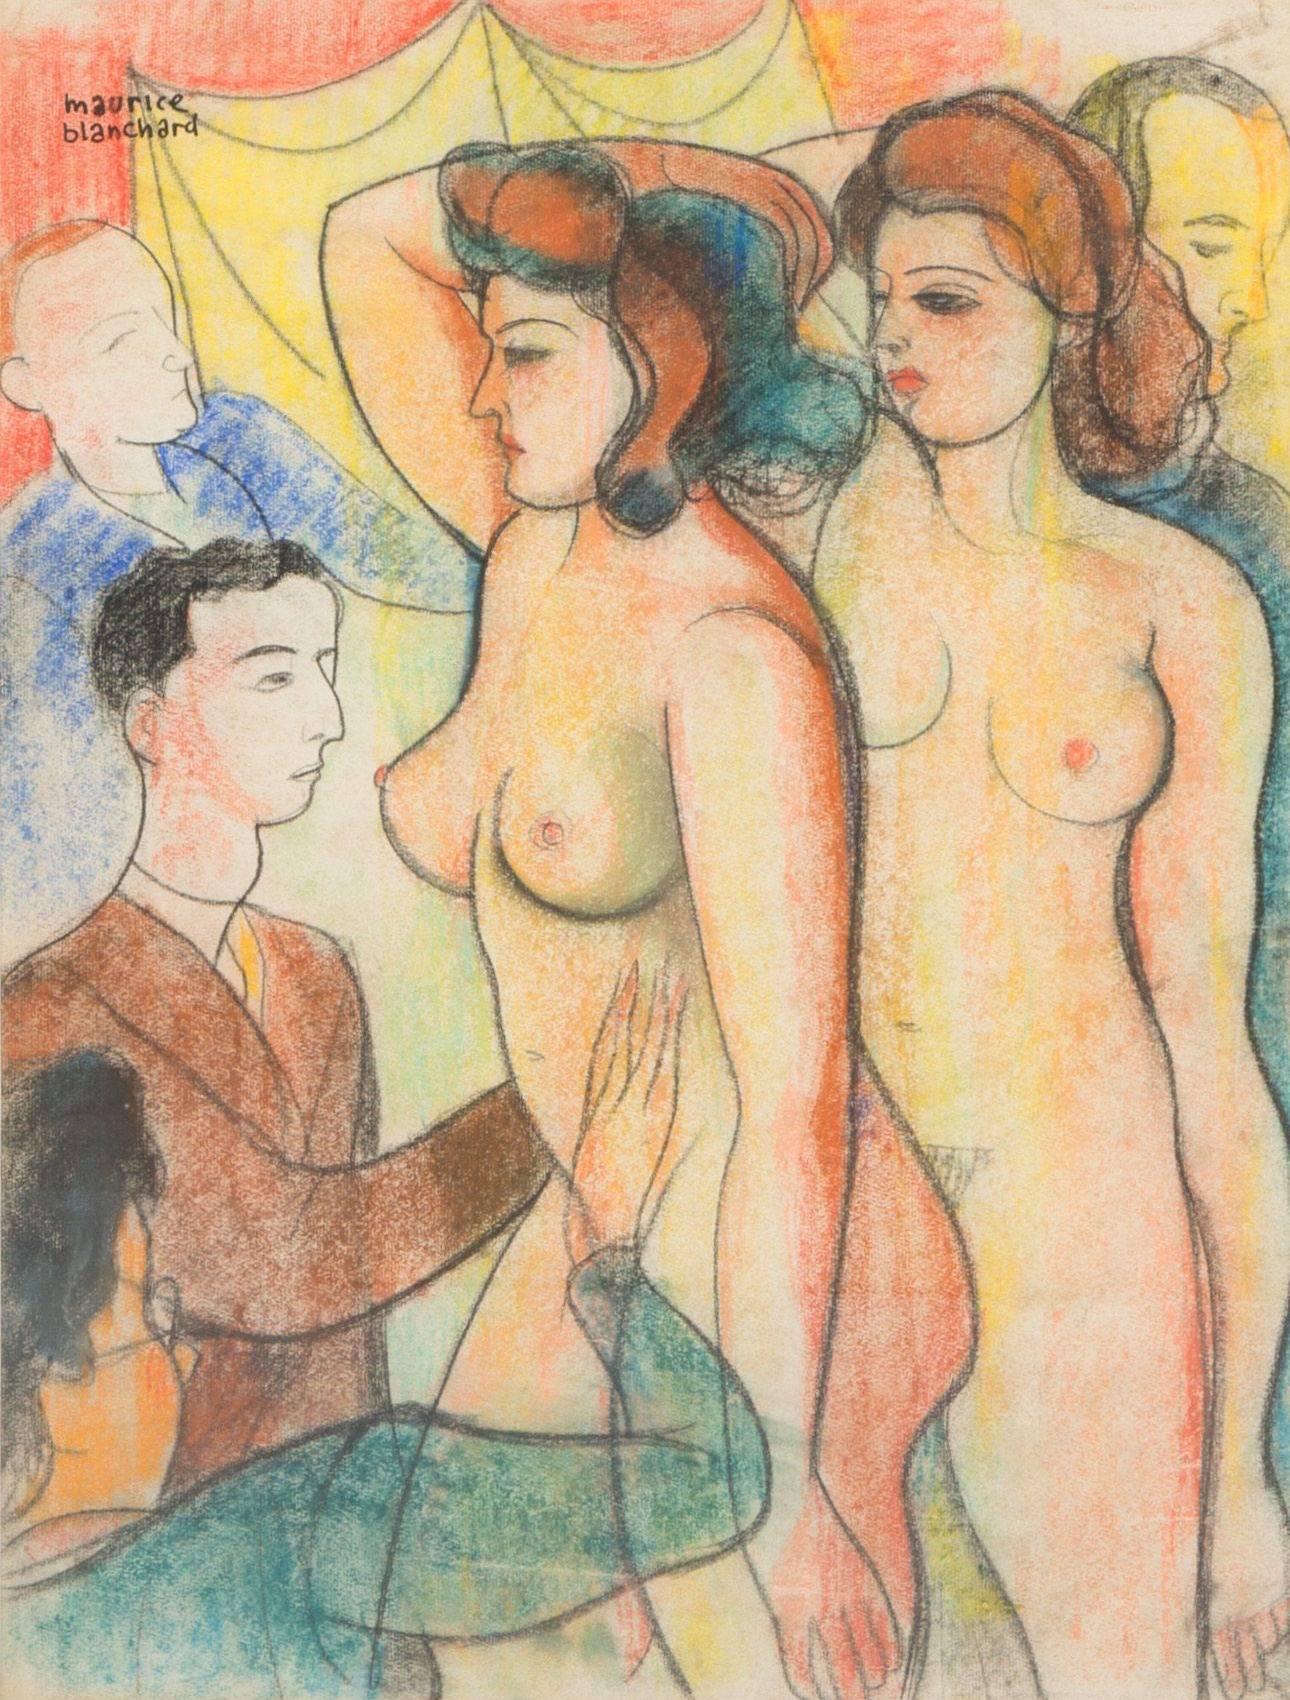 Maurice Blanchard Nude - The nude woman models